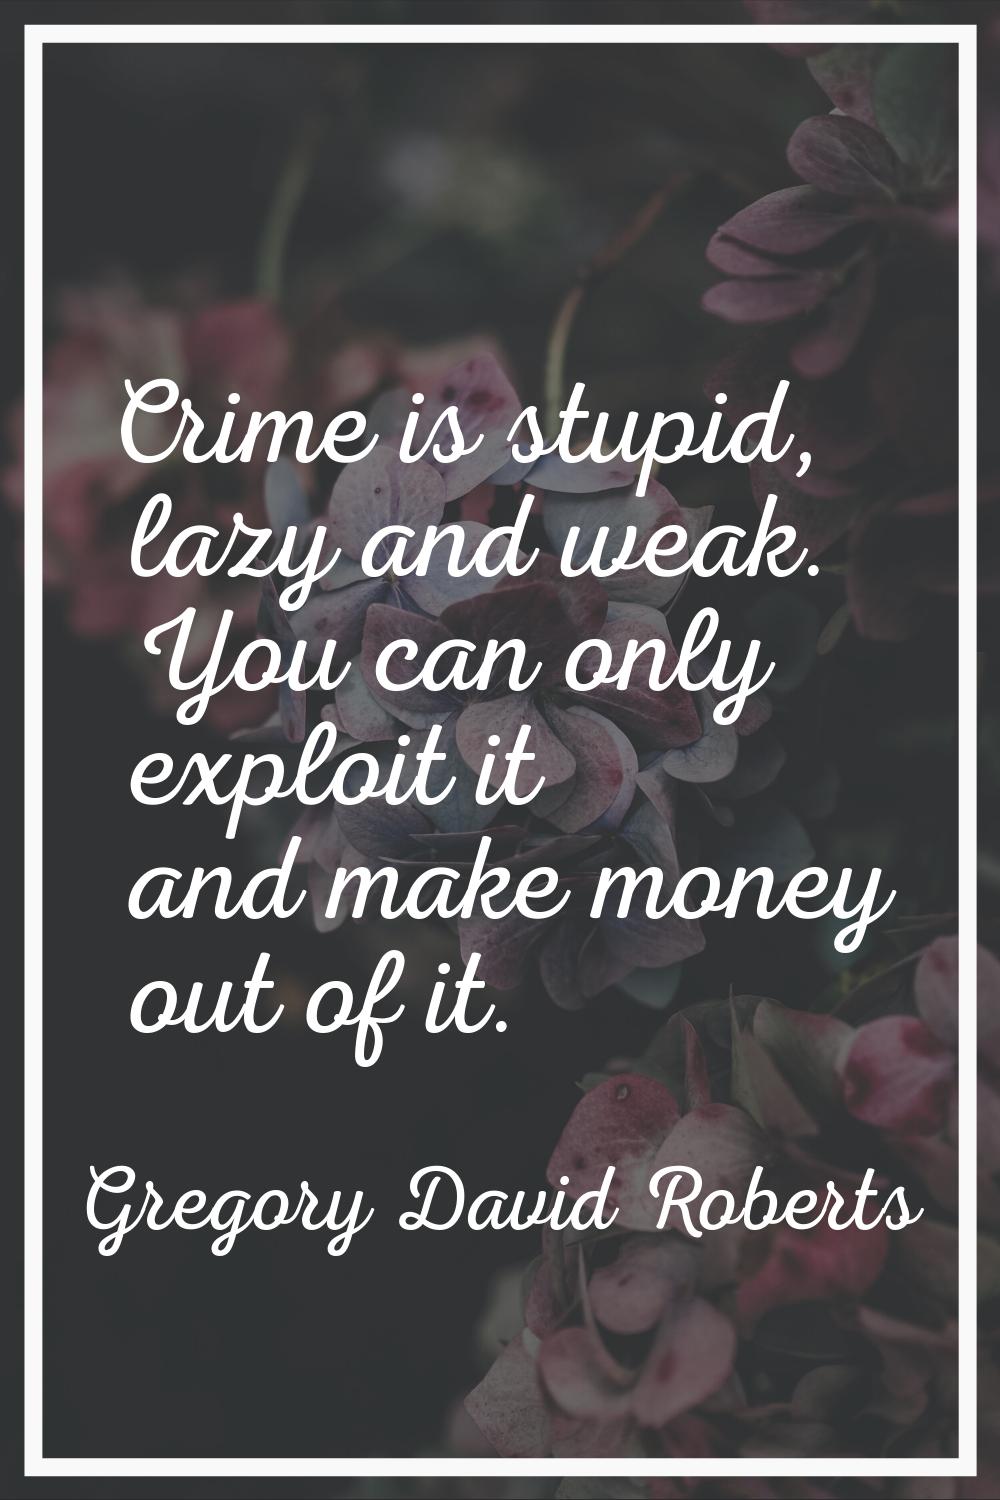 Crime is stupid, lazy and weak. You can only exploit it and make money out of it.